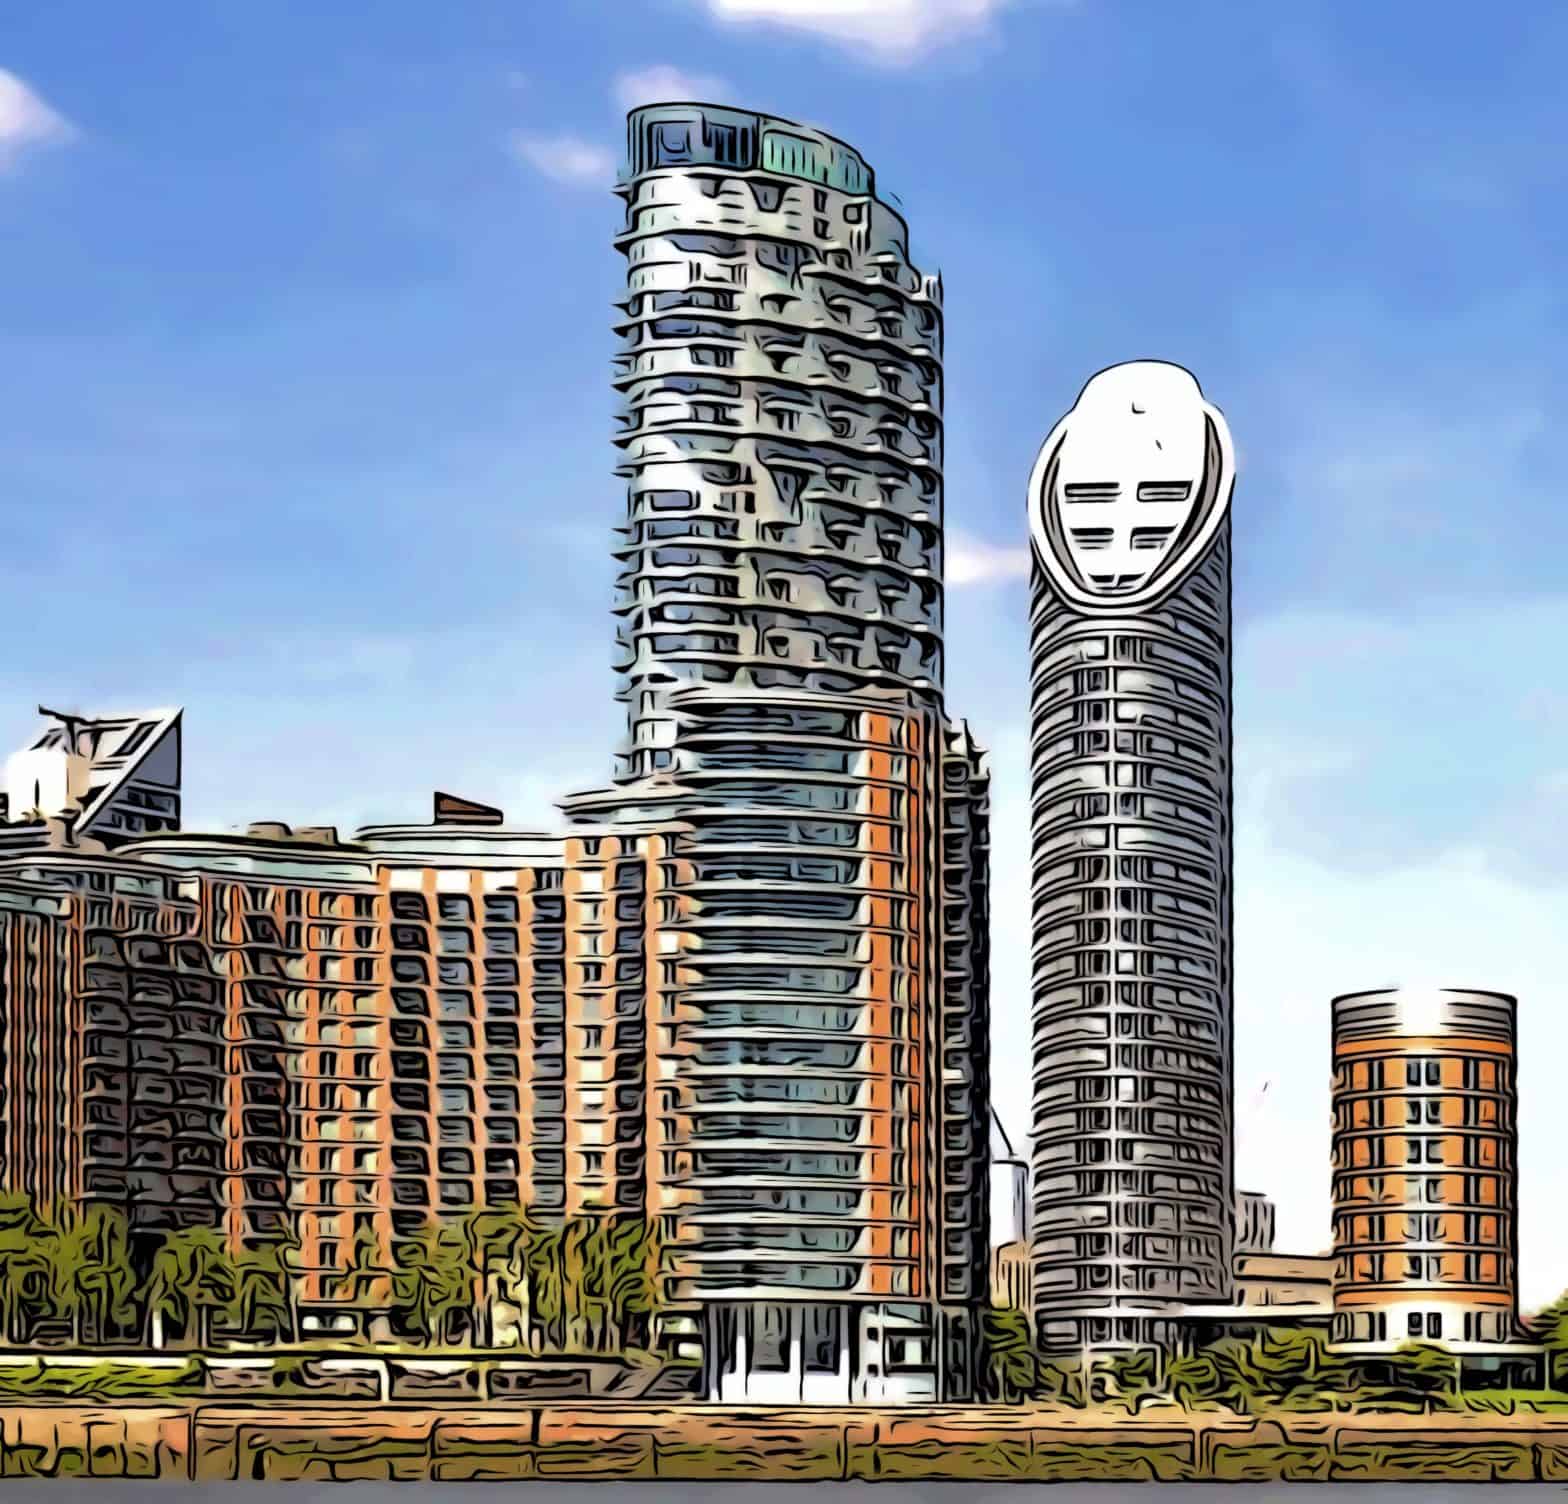 Charrington Tower and Ontario Tower behind New Providence Wharf block A-E